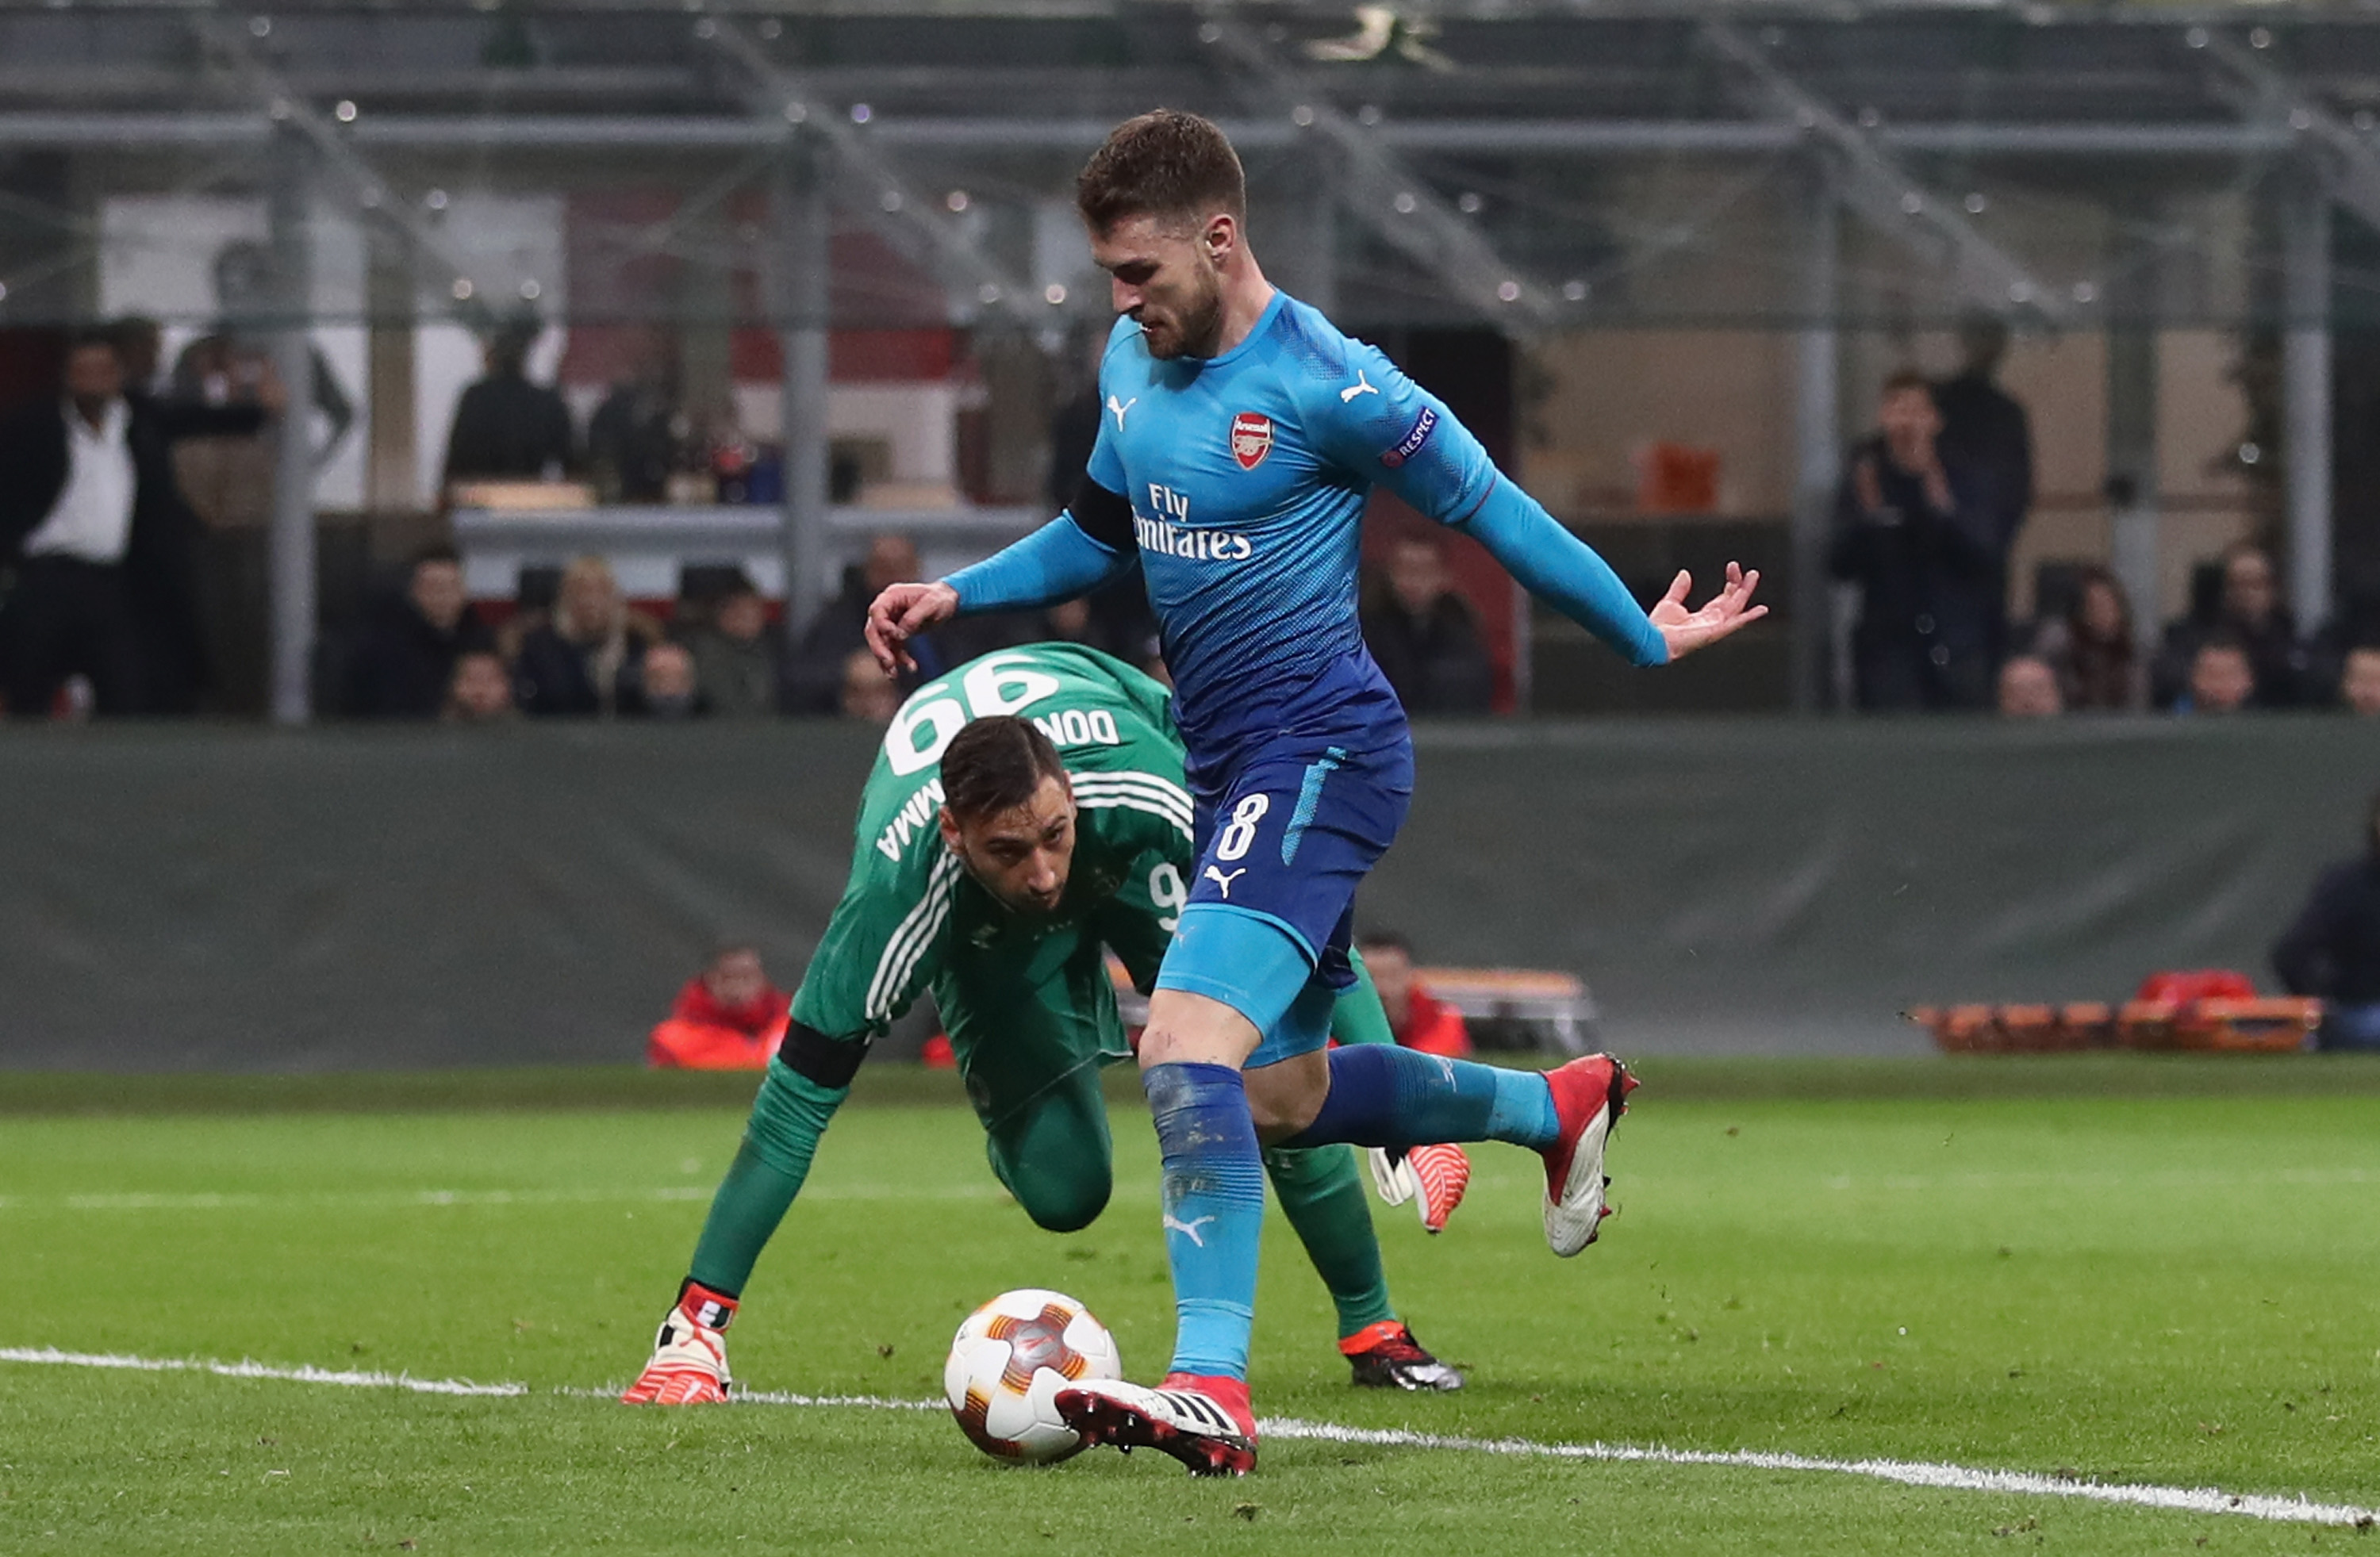 MILAN, ITALY - MARCH 08:  Aaron Ramsey of Arsenal rounds AC Milan goalkeeper Gianluigi Donnarumma to score during the UEFA Europa League Round of 16 match between AC Milan and Arsenal at the San Siro on March 8, 2018 in Milan, Italy.  (Photo by Catherine Ivill/Getty Images)